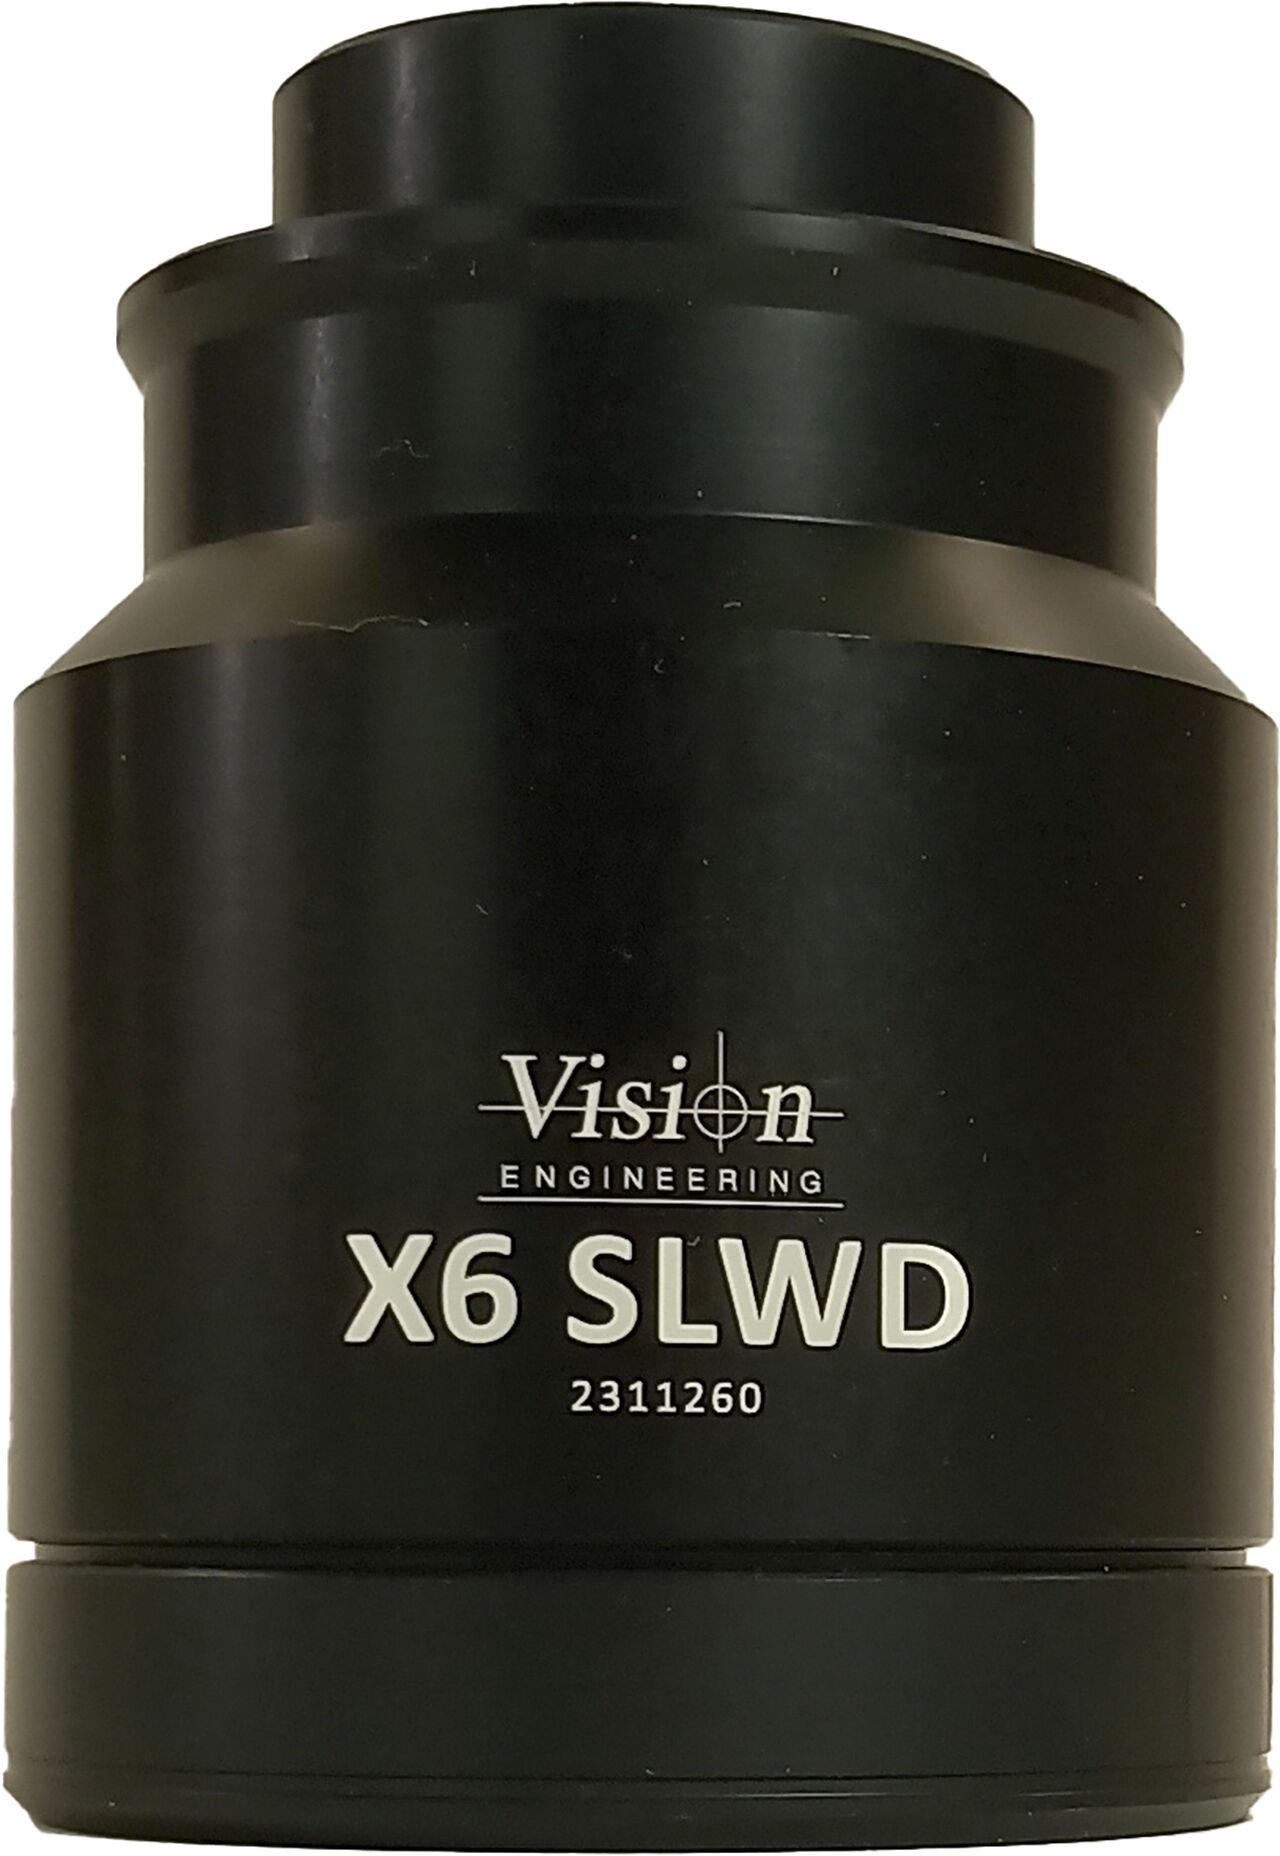 x6 SLWD Objective Lens